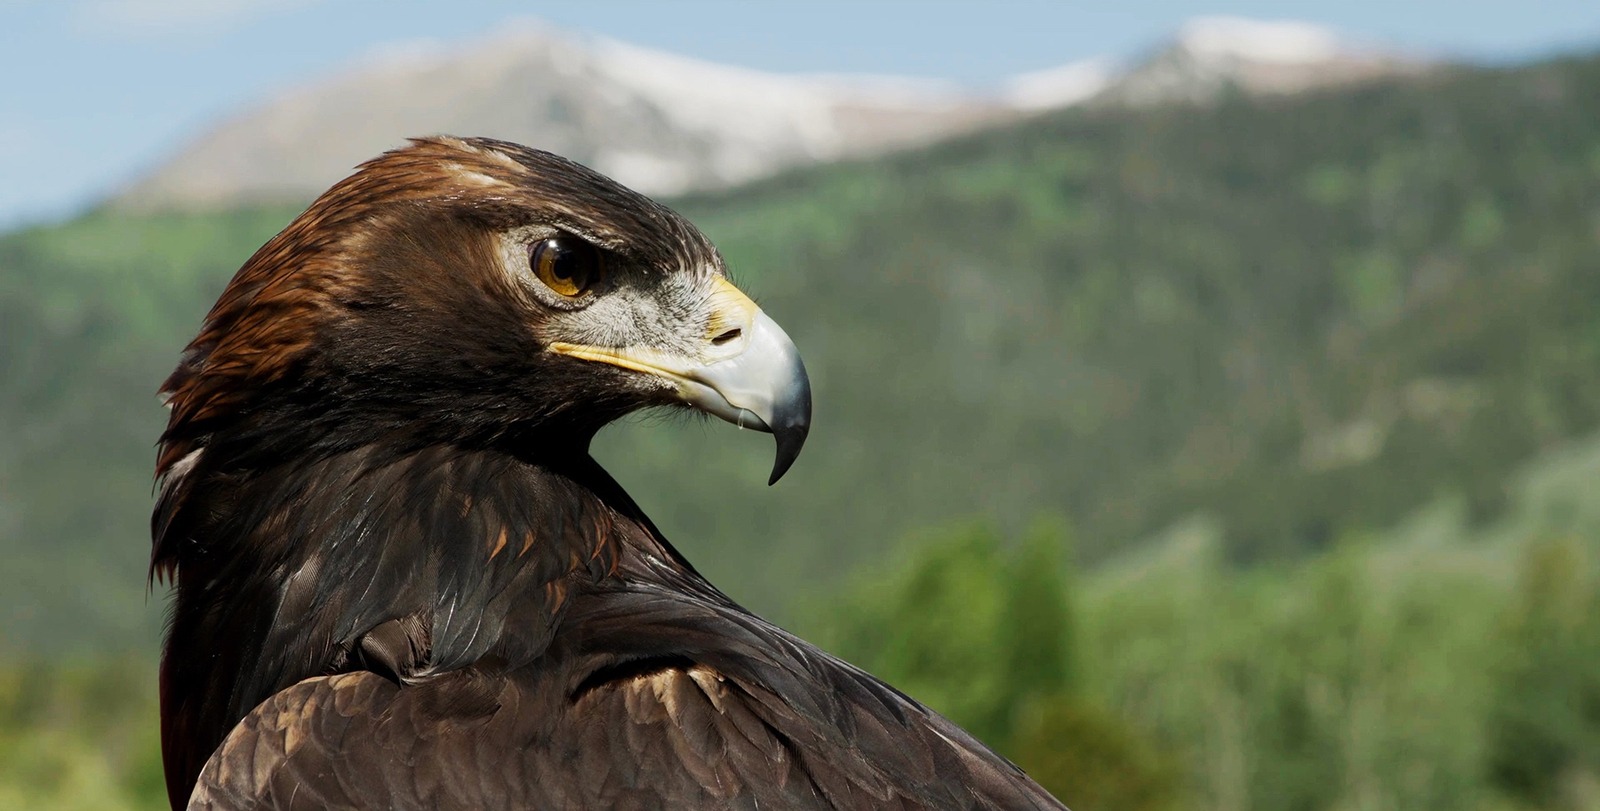 Striking birds of prey, golden eagles are sensitive to a number of environmental factors. A few years ago, a golden that was part of a research project in Yellowstone died from lead poisoning after ingesting lead ammo. Photo courtesy Wild Excellence Films